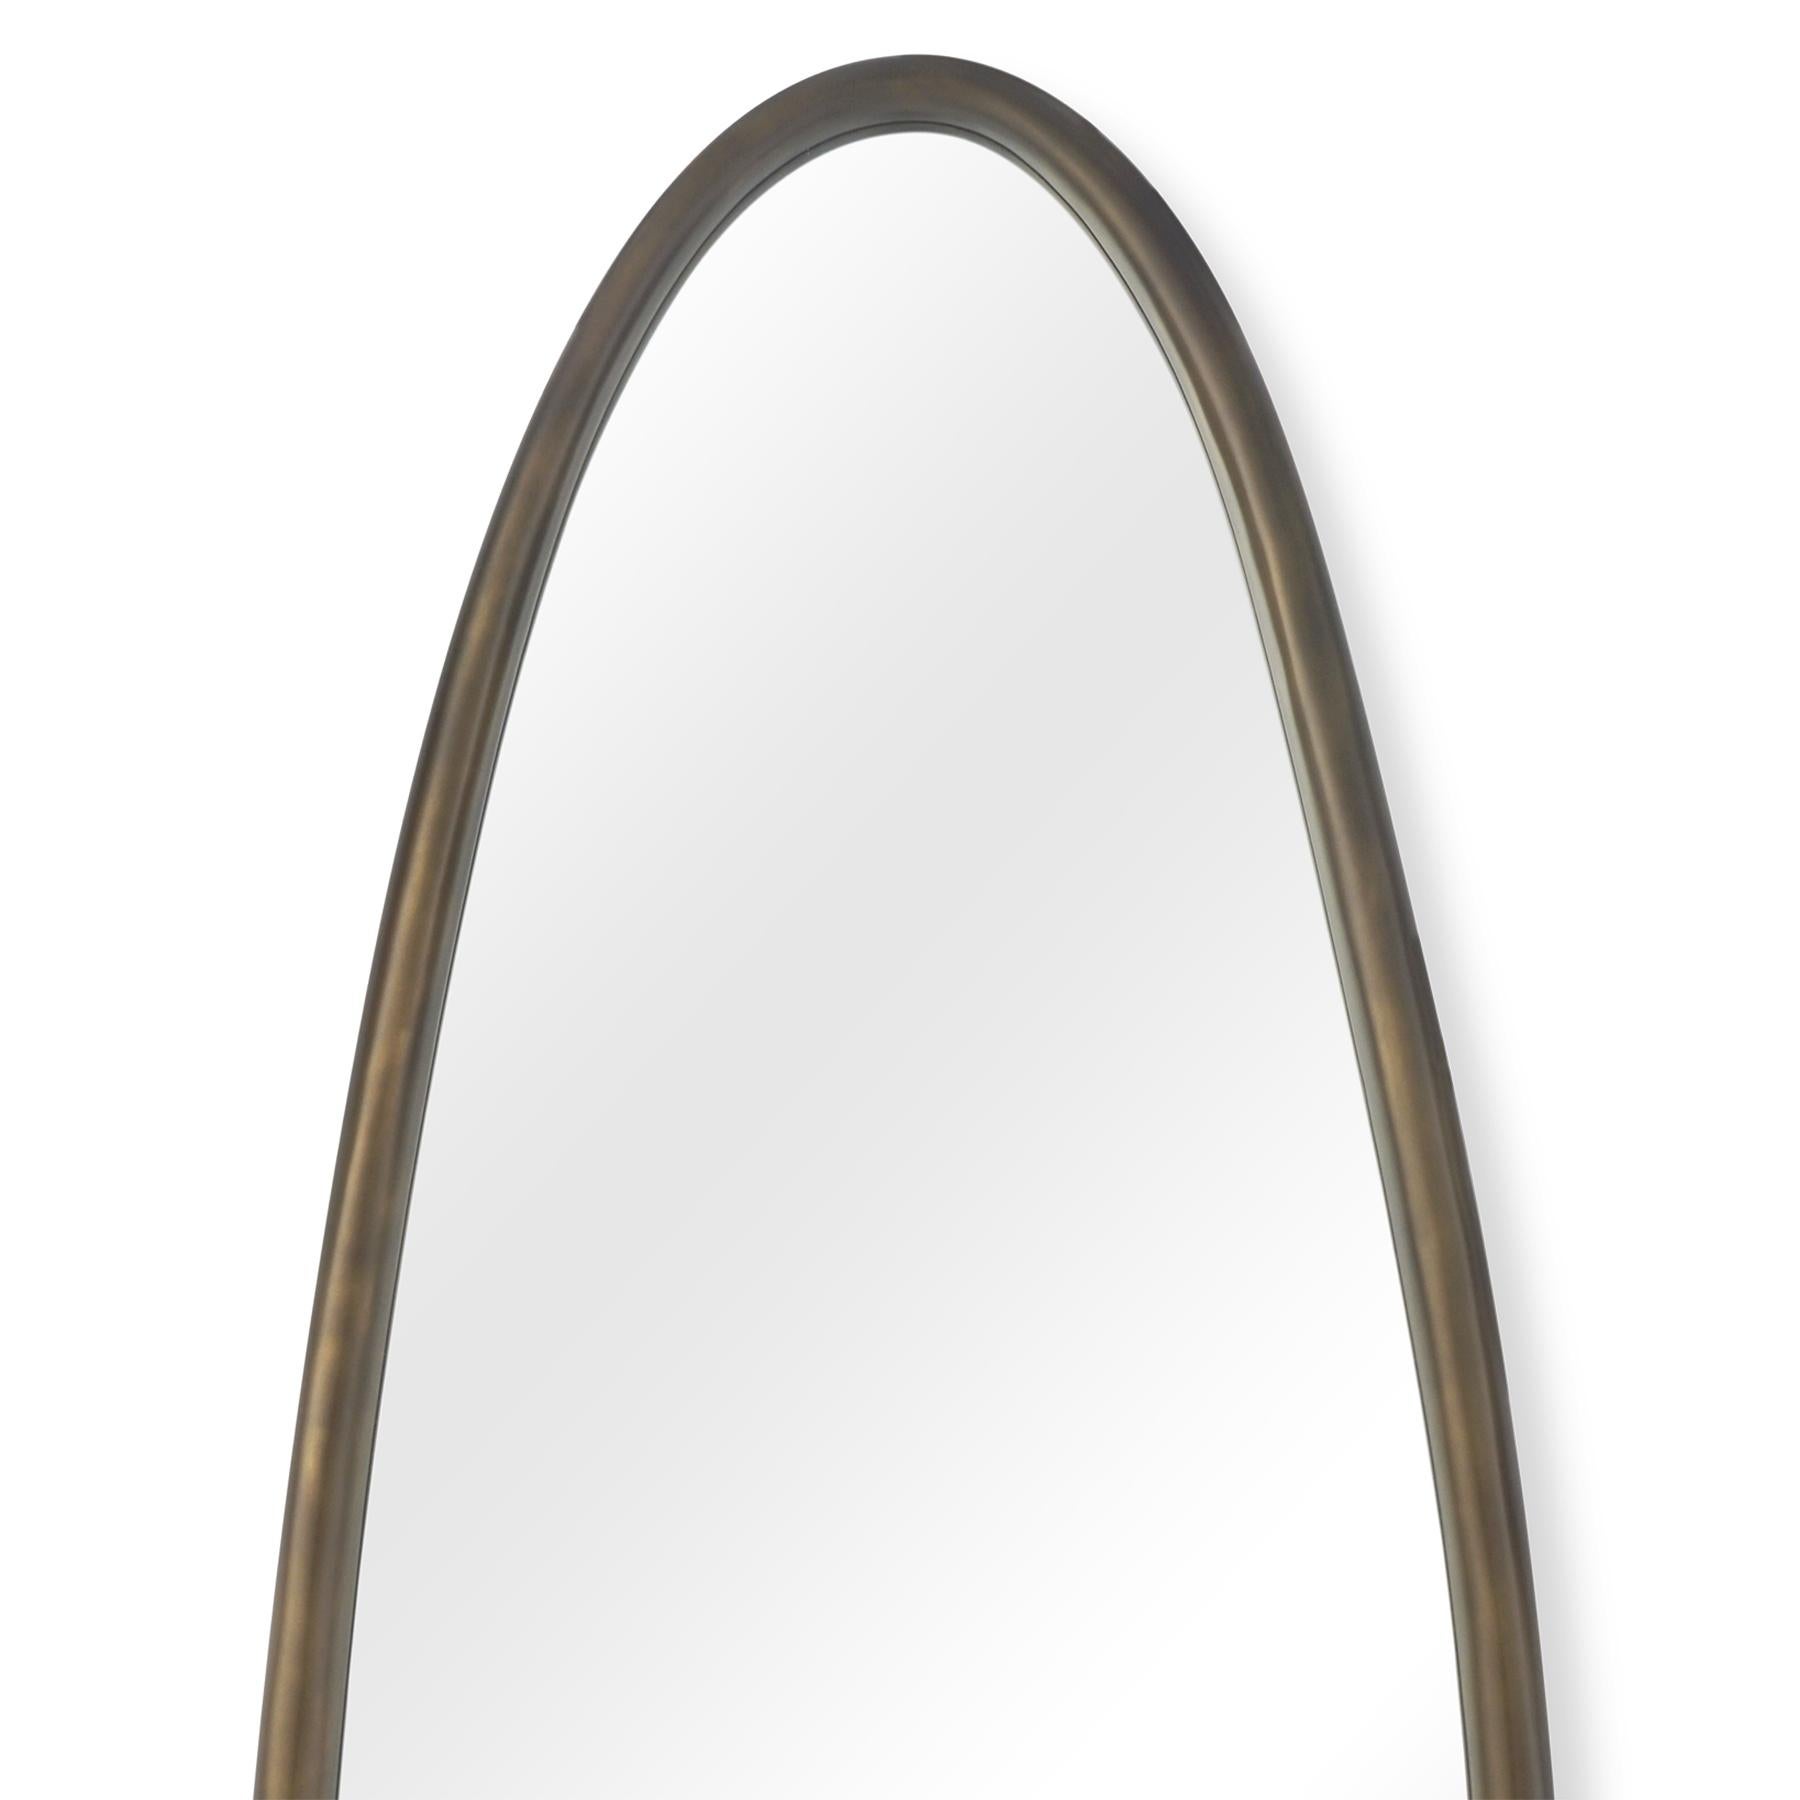 Mirror Tolens with solid mahogany frame in
bronze painted finish. With flat mirror glass.
Measures: L 82 x D 06 x H 190cm, price: 4900,00€.
Also available in tobacco or silver leaf or
gold leaf finish.
Also available on request in :
L104xD06xH240cm,